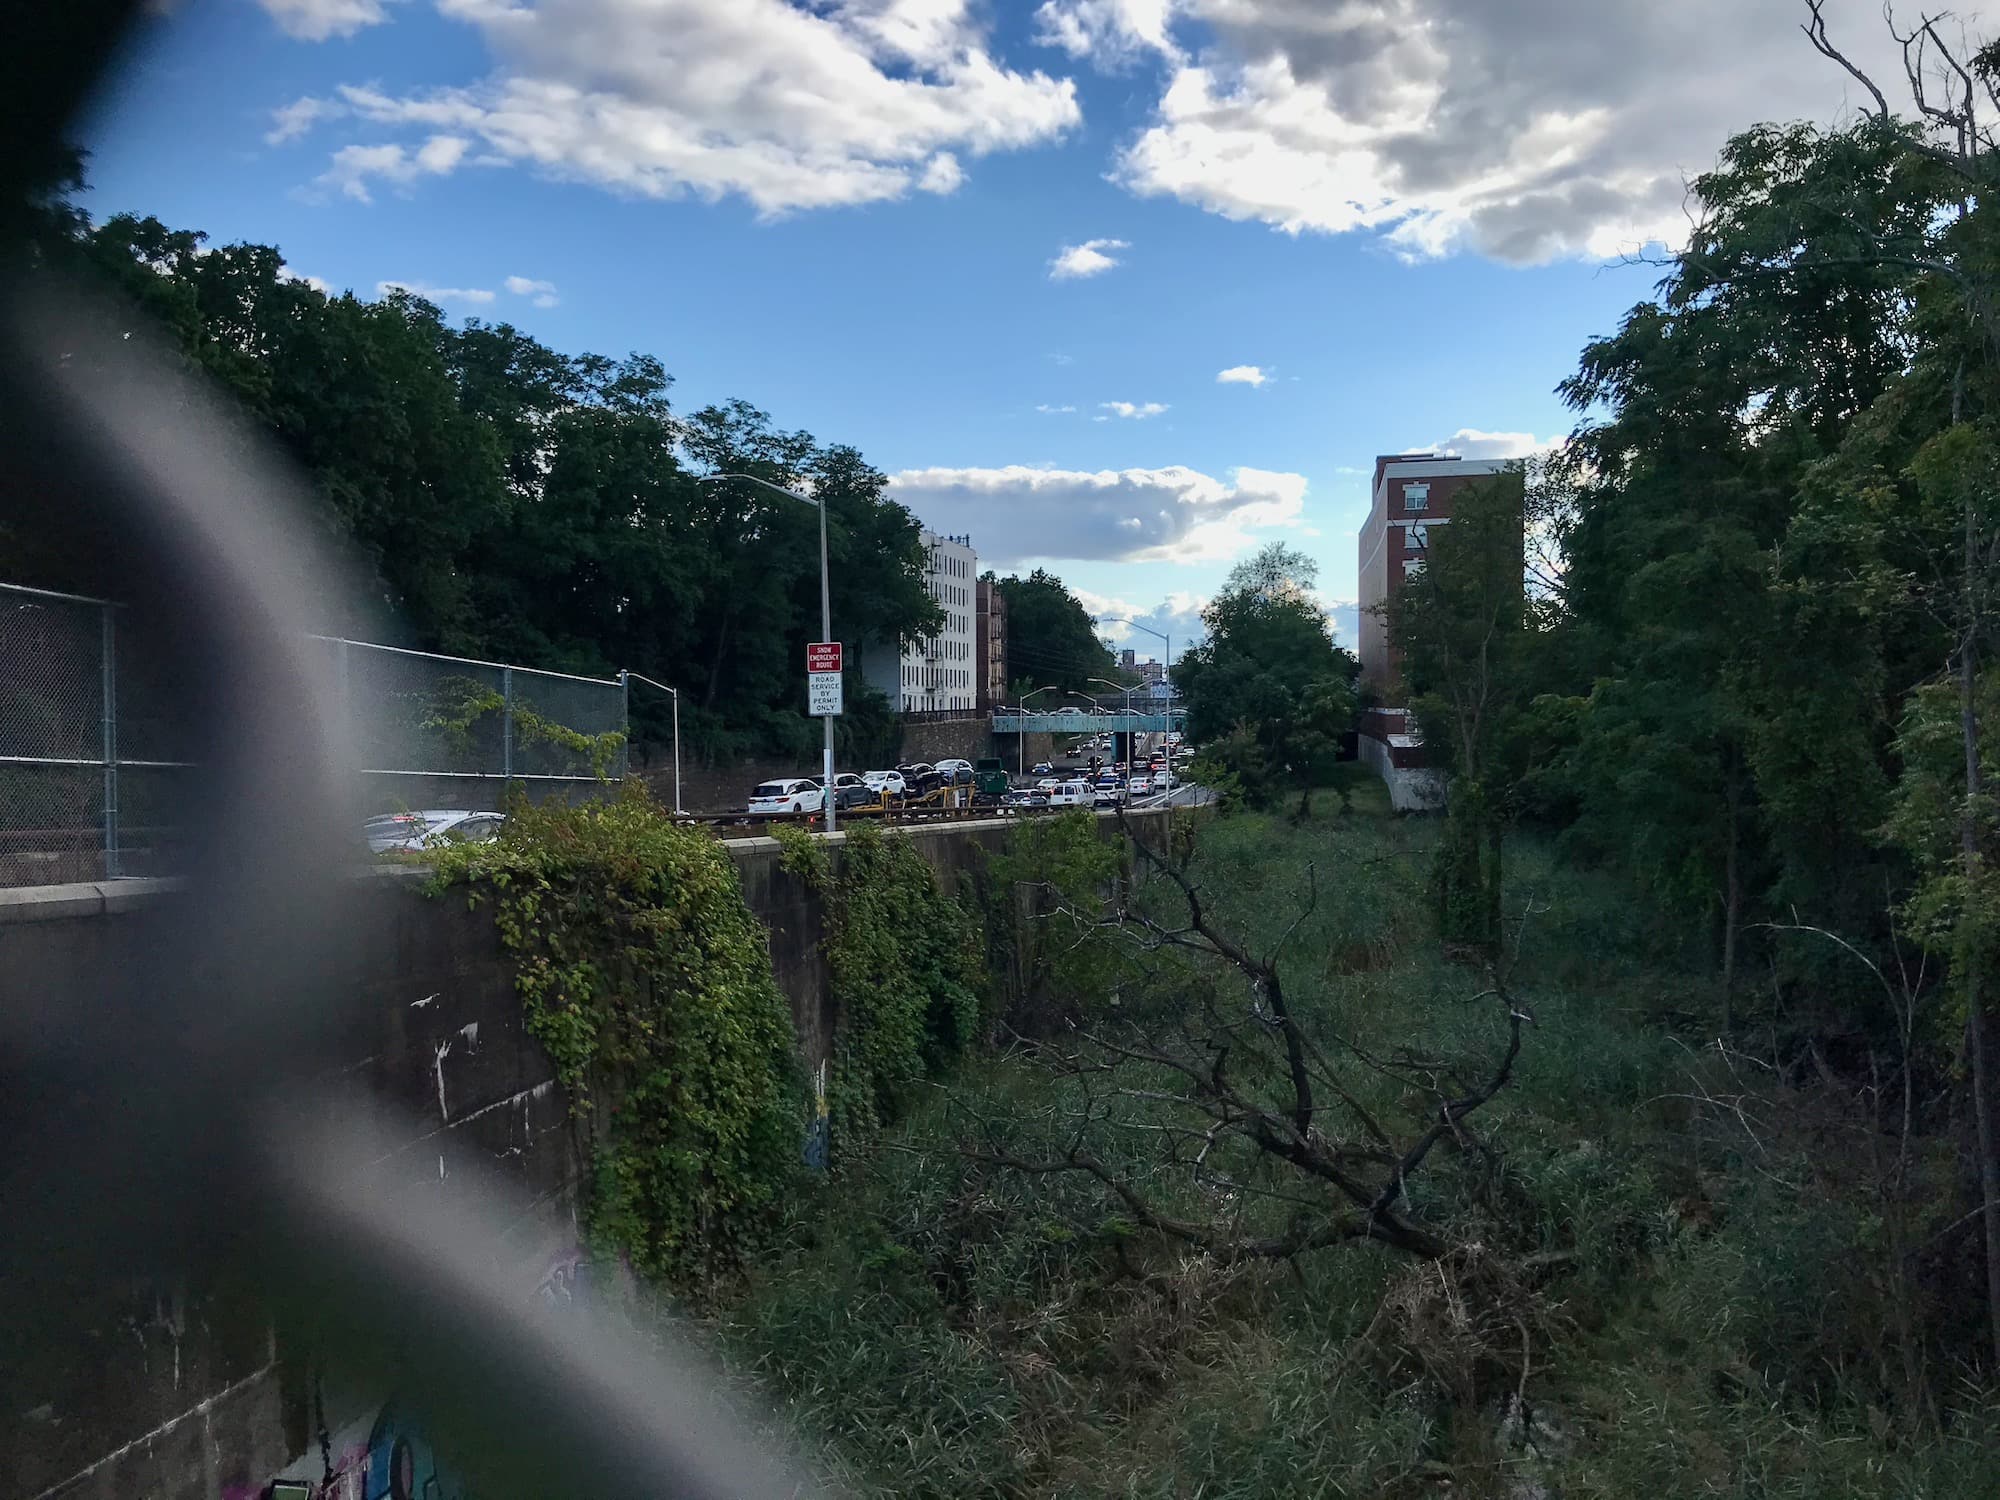 The expansive view of the Tibbetts Brook corridor, set against an urban backdrop, as seen through a fence.